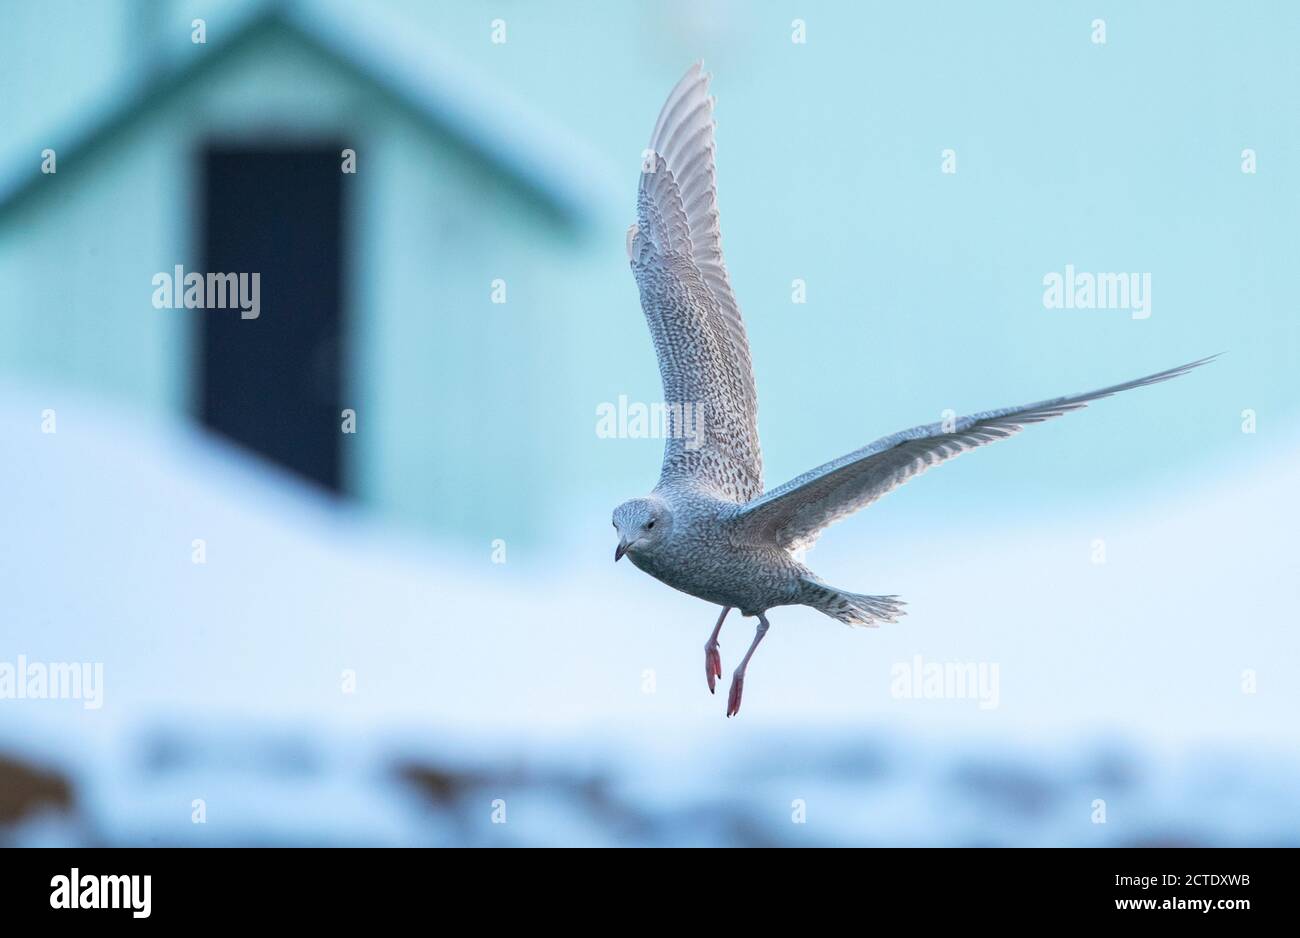 Iceland gull (Larus glaucoides), Wintering immature flying in front of an urban area, Norway, Finnmark, Varangerfjord Stock Photo